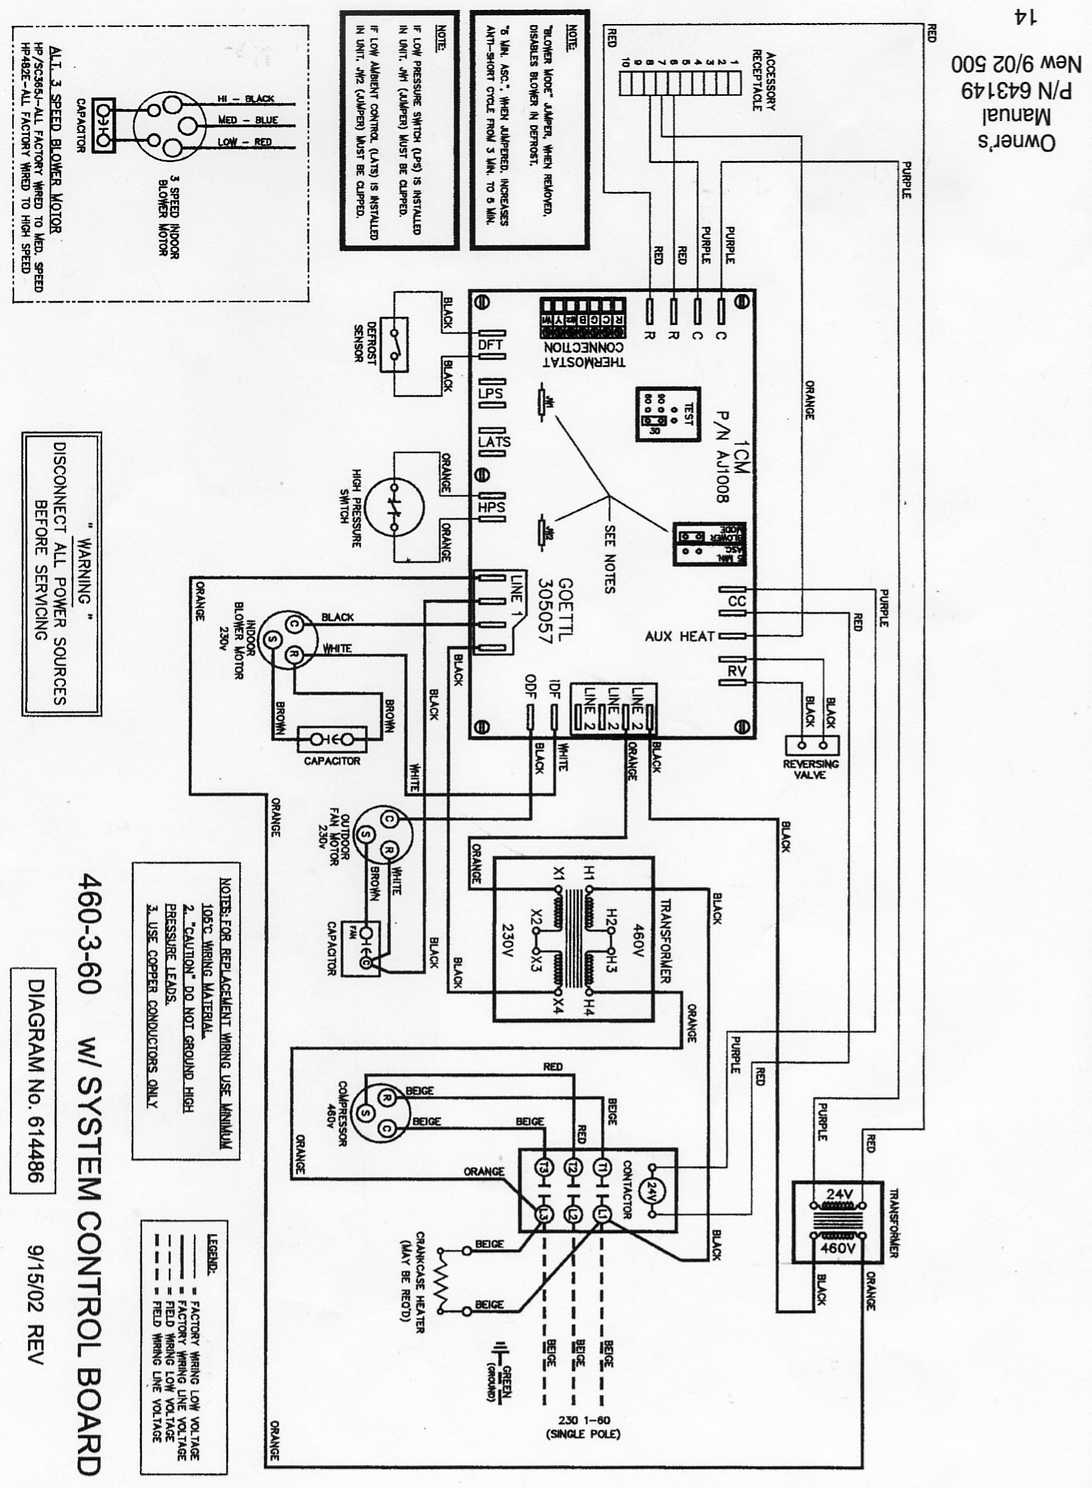 Take A Look At This Wiring Diagram